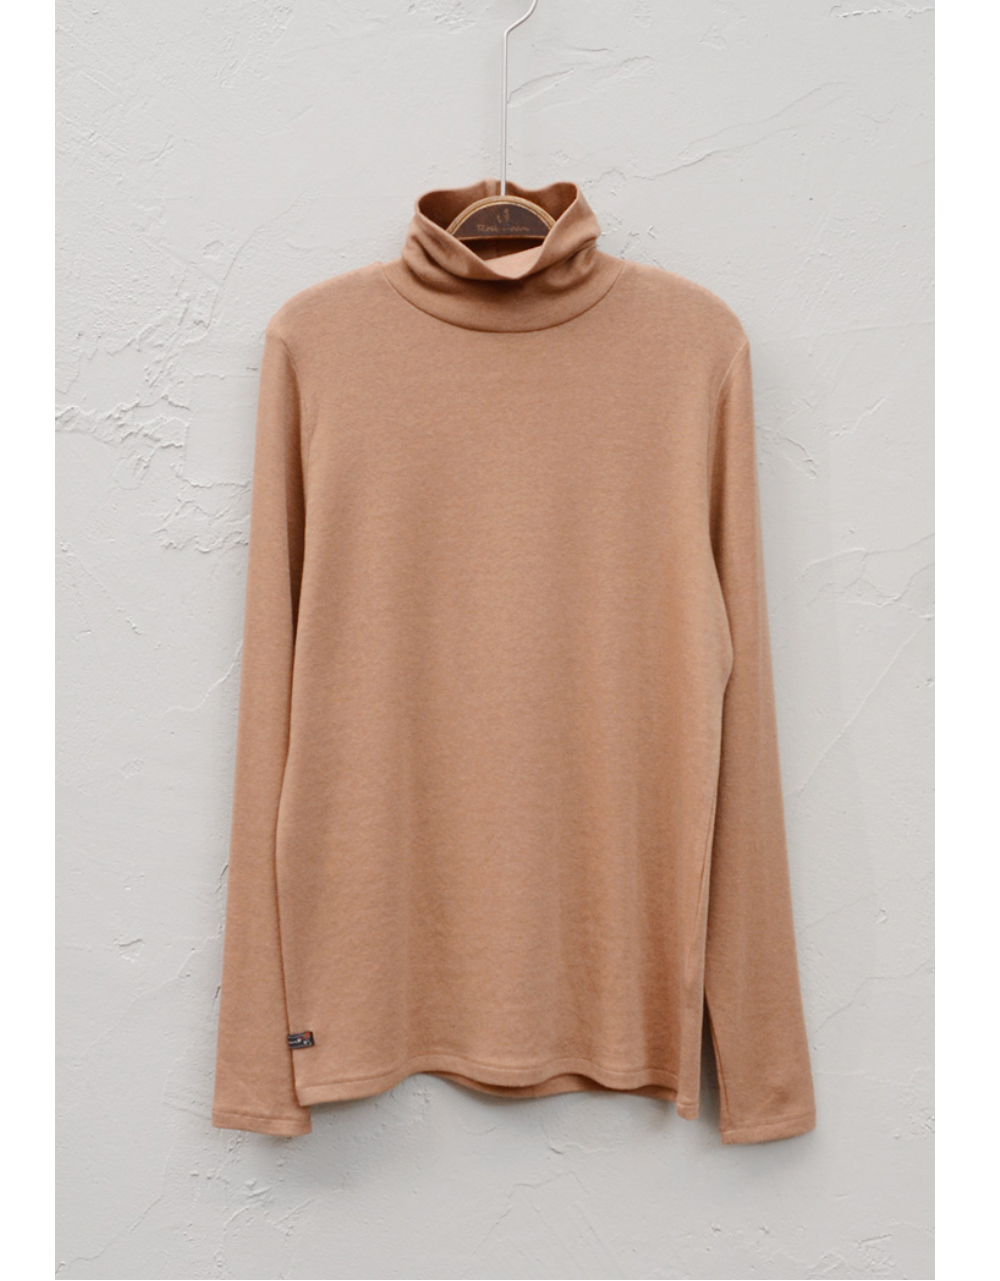 long sleeved tee peach color image-S3L2